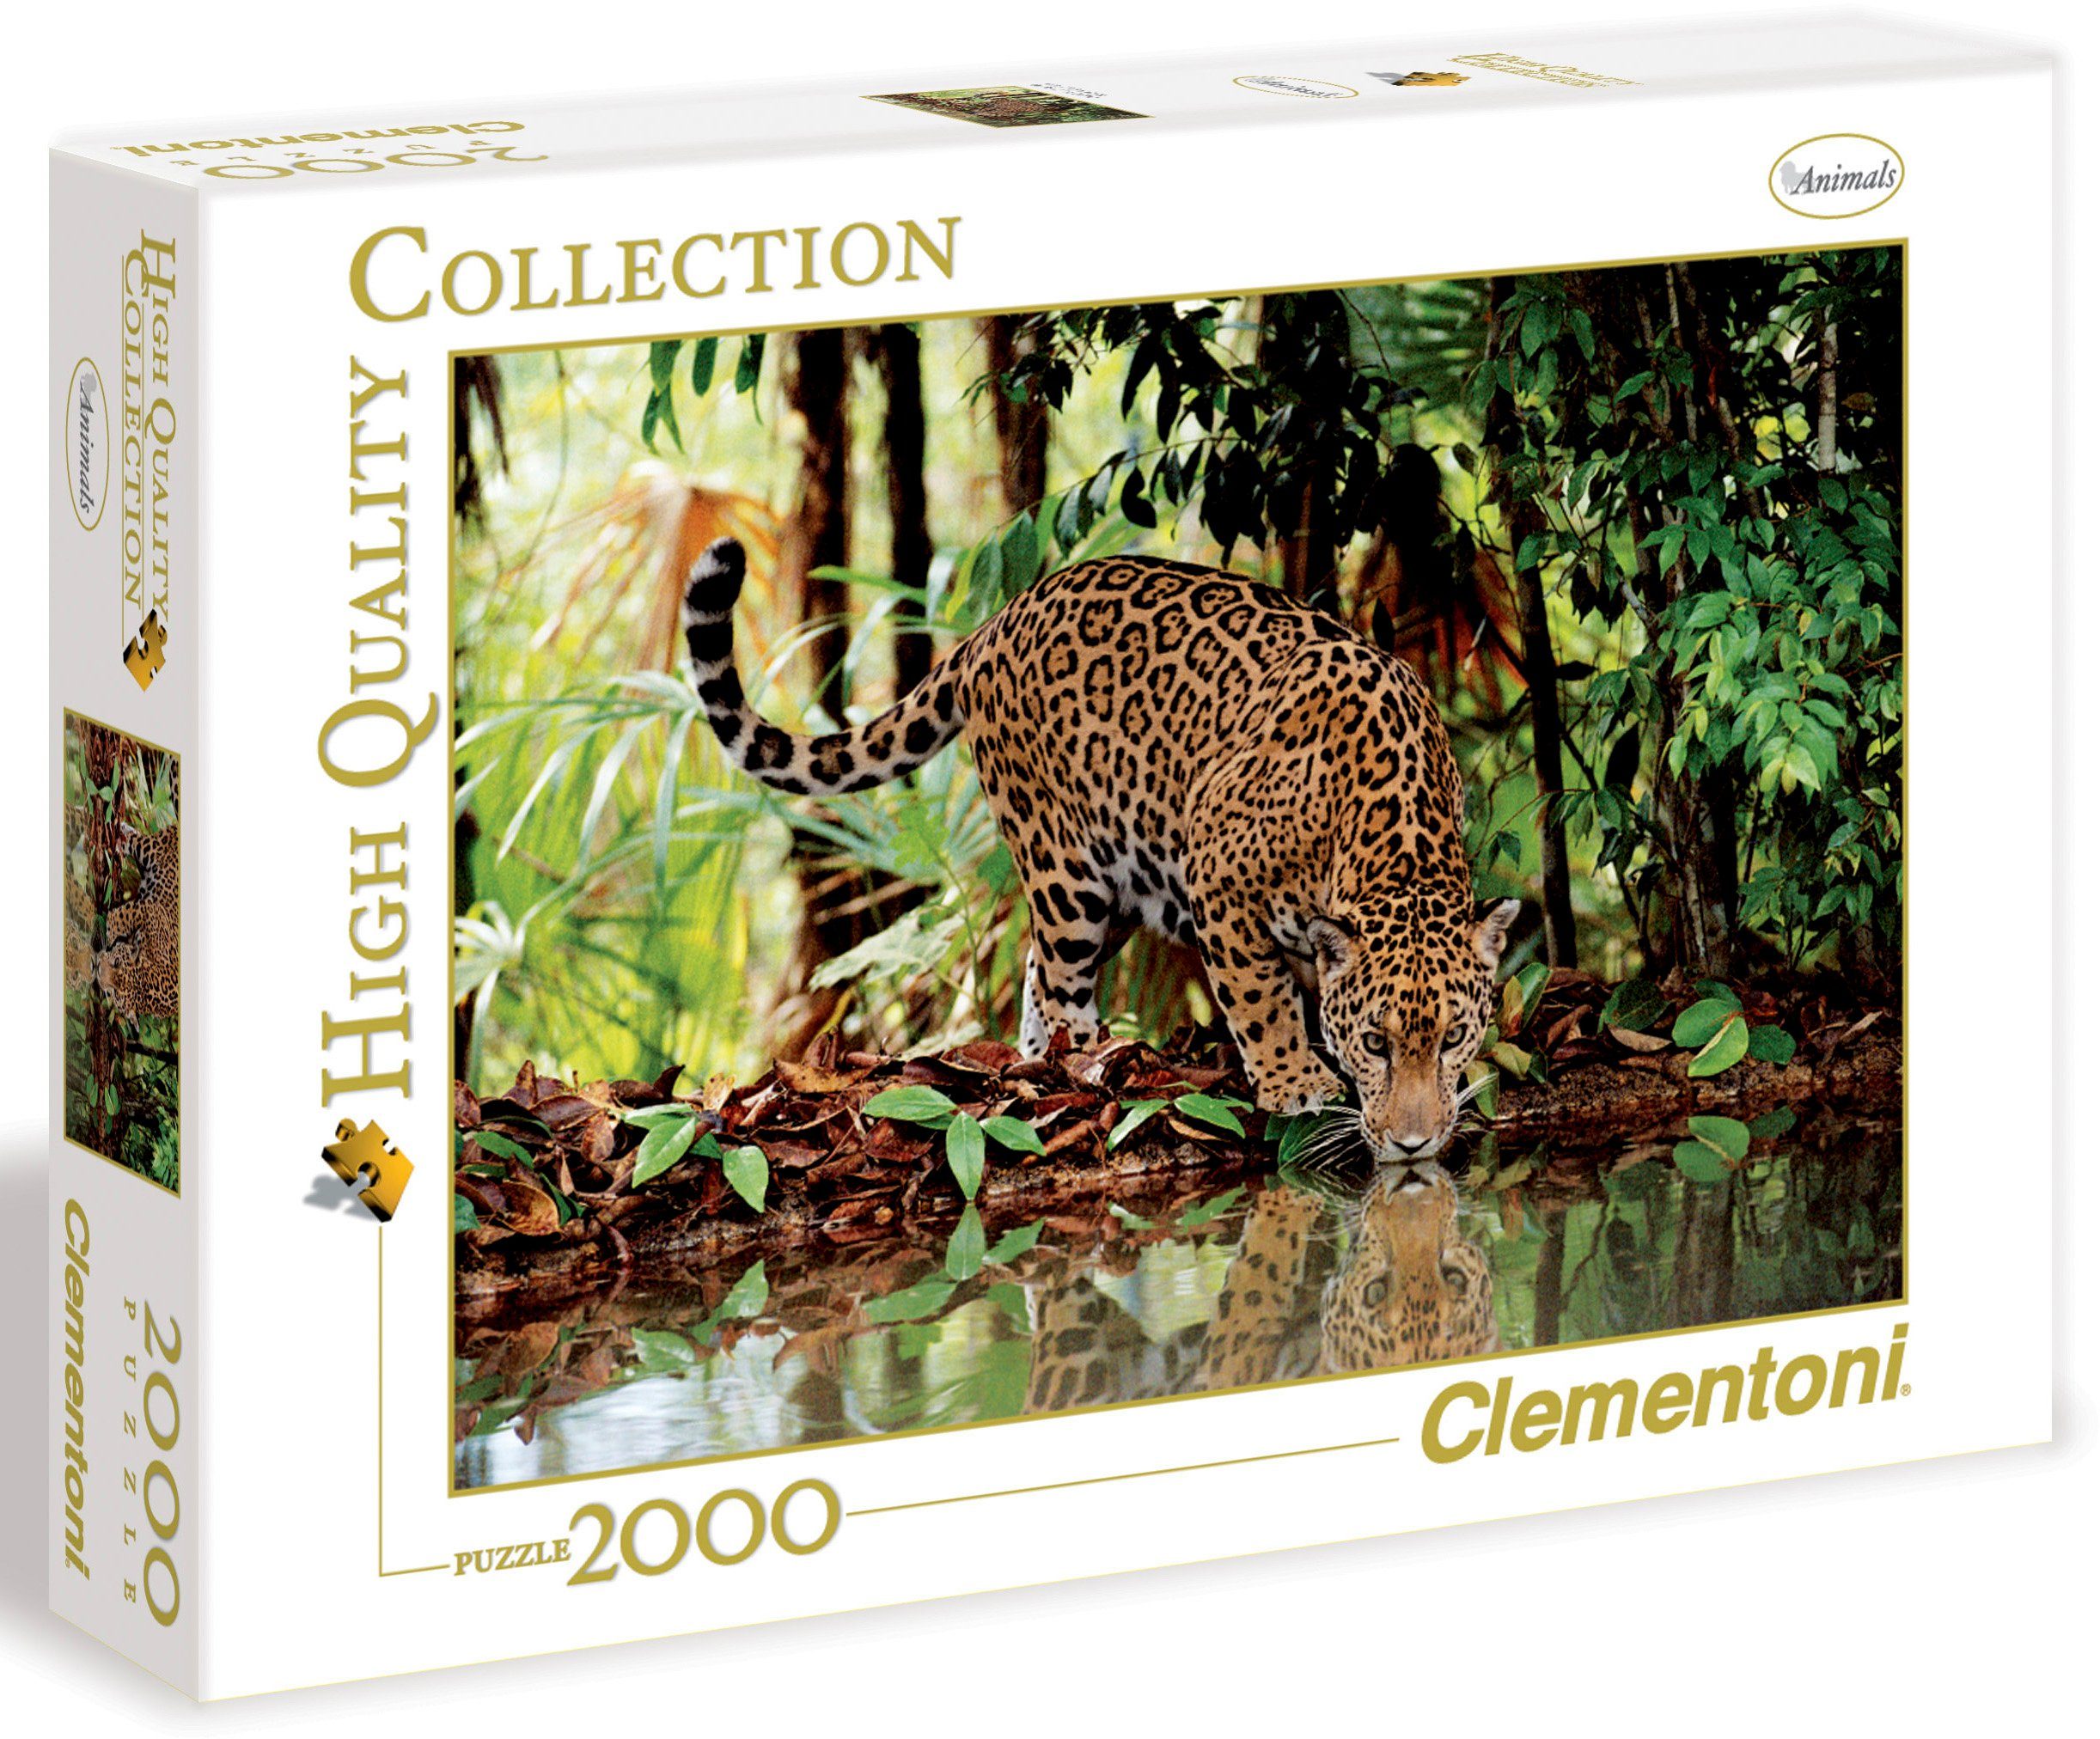 Made Clementoni® Quality Puzzle Leopard, 2000 Europe Puzzleteile, High in Collection,